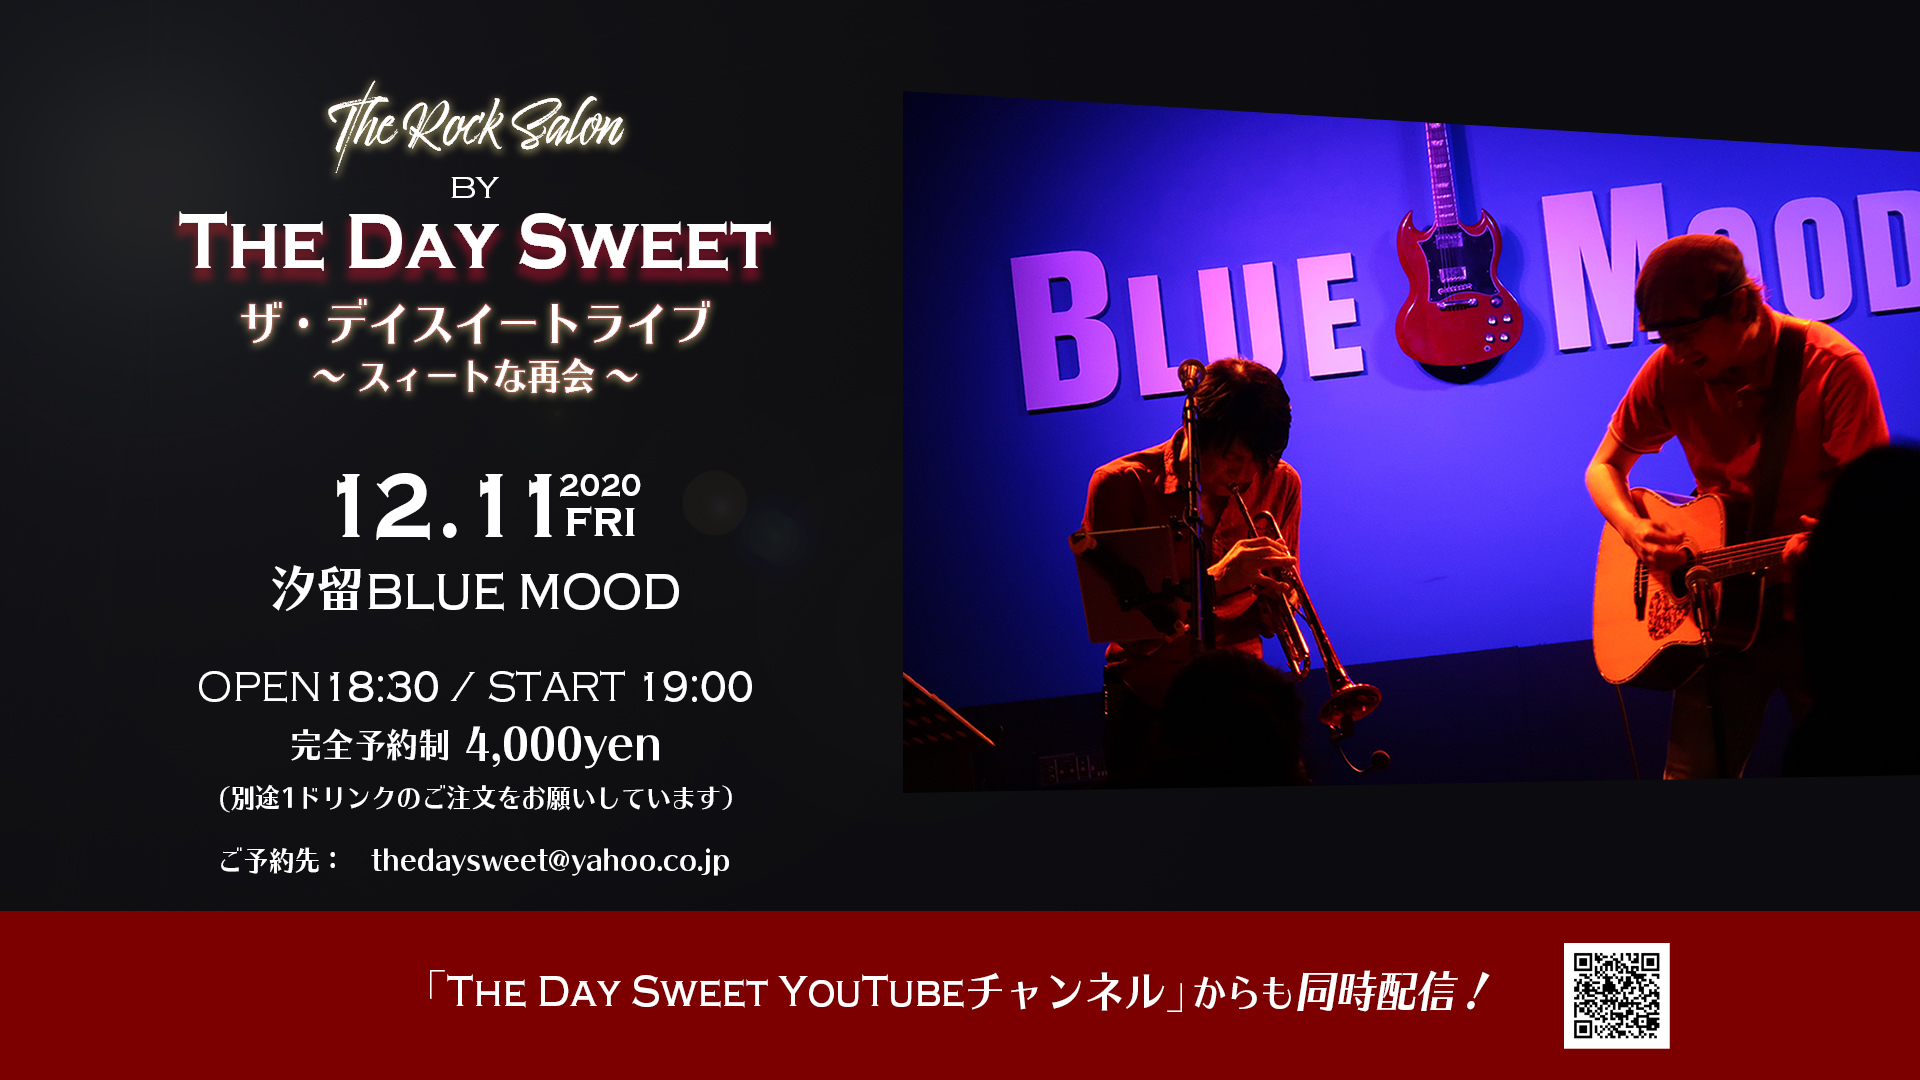 The Day Sweet ライブ〜 スィートな再会 〜